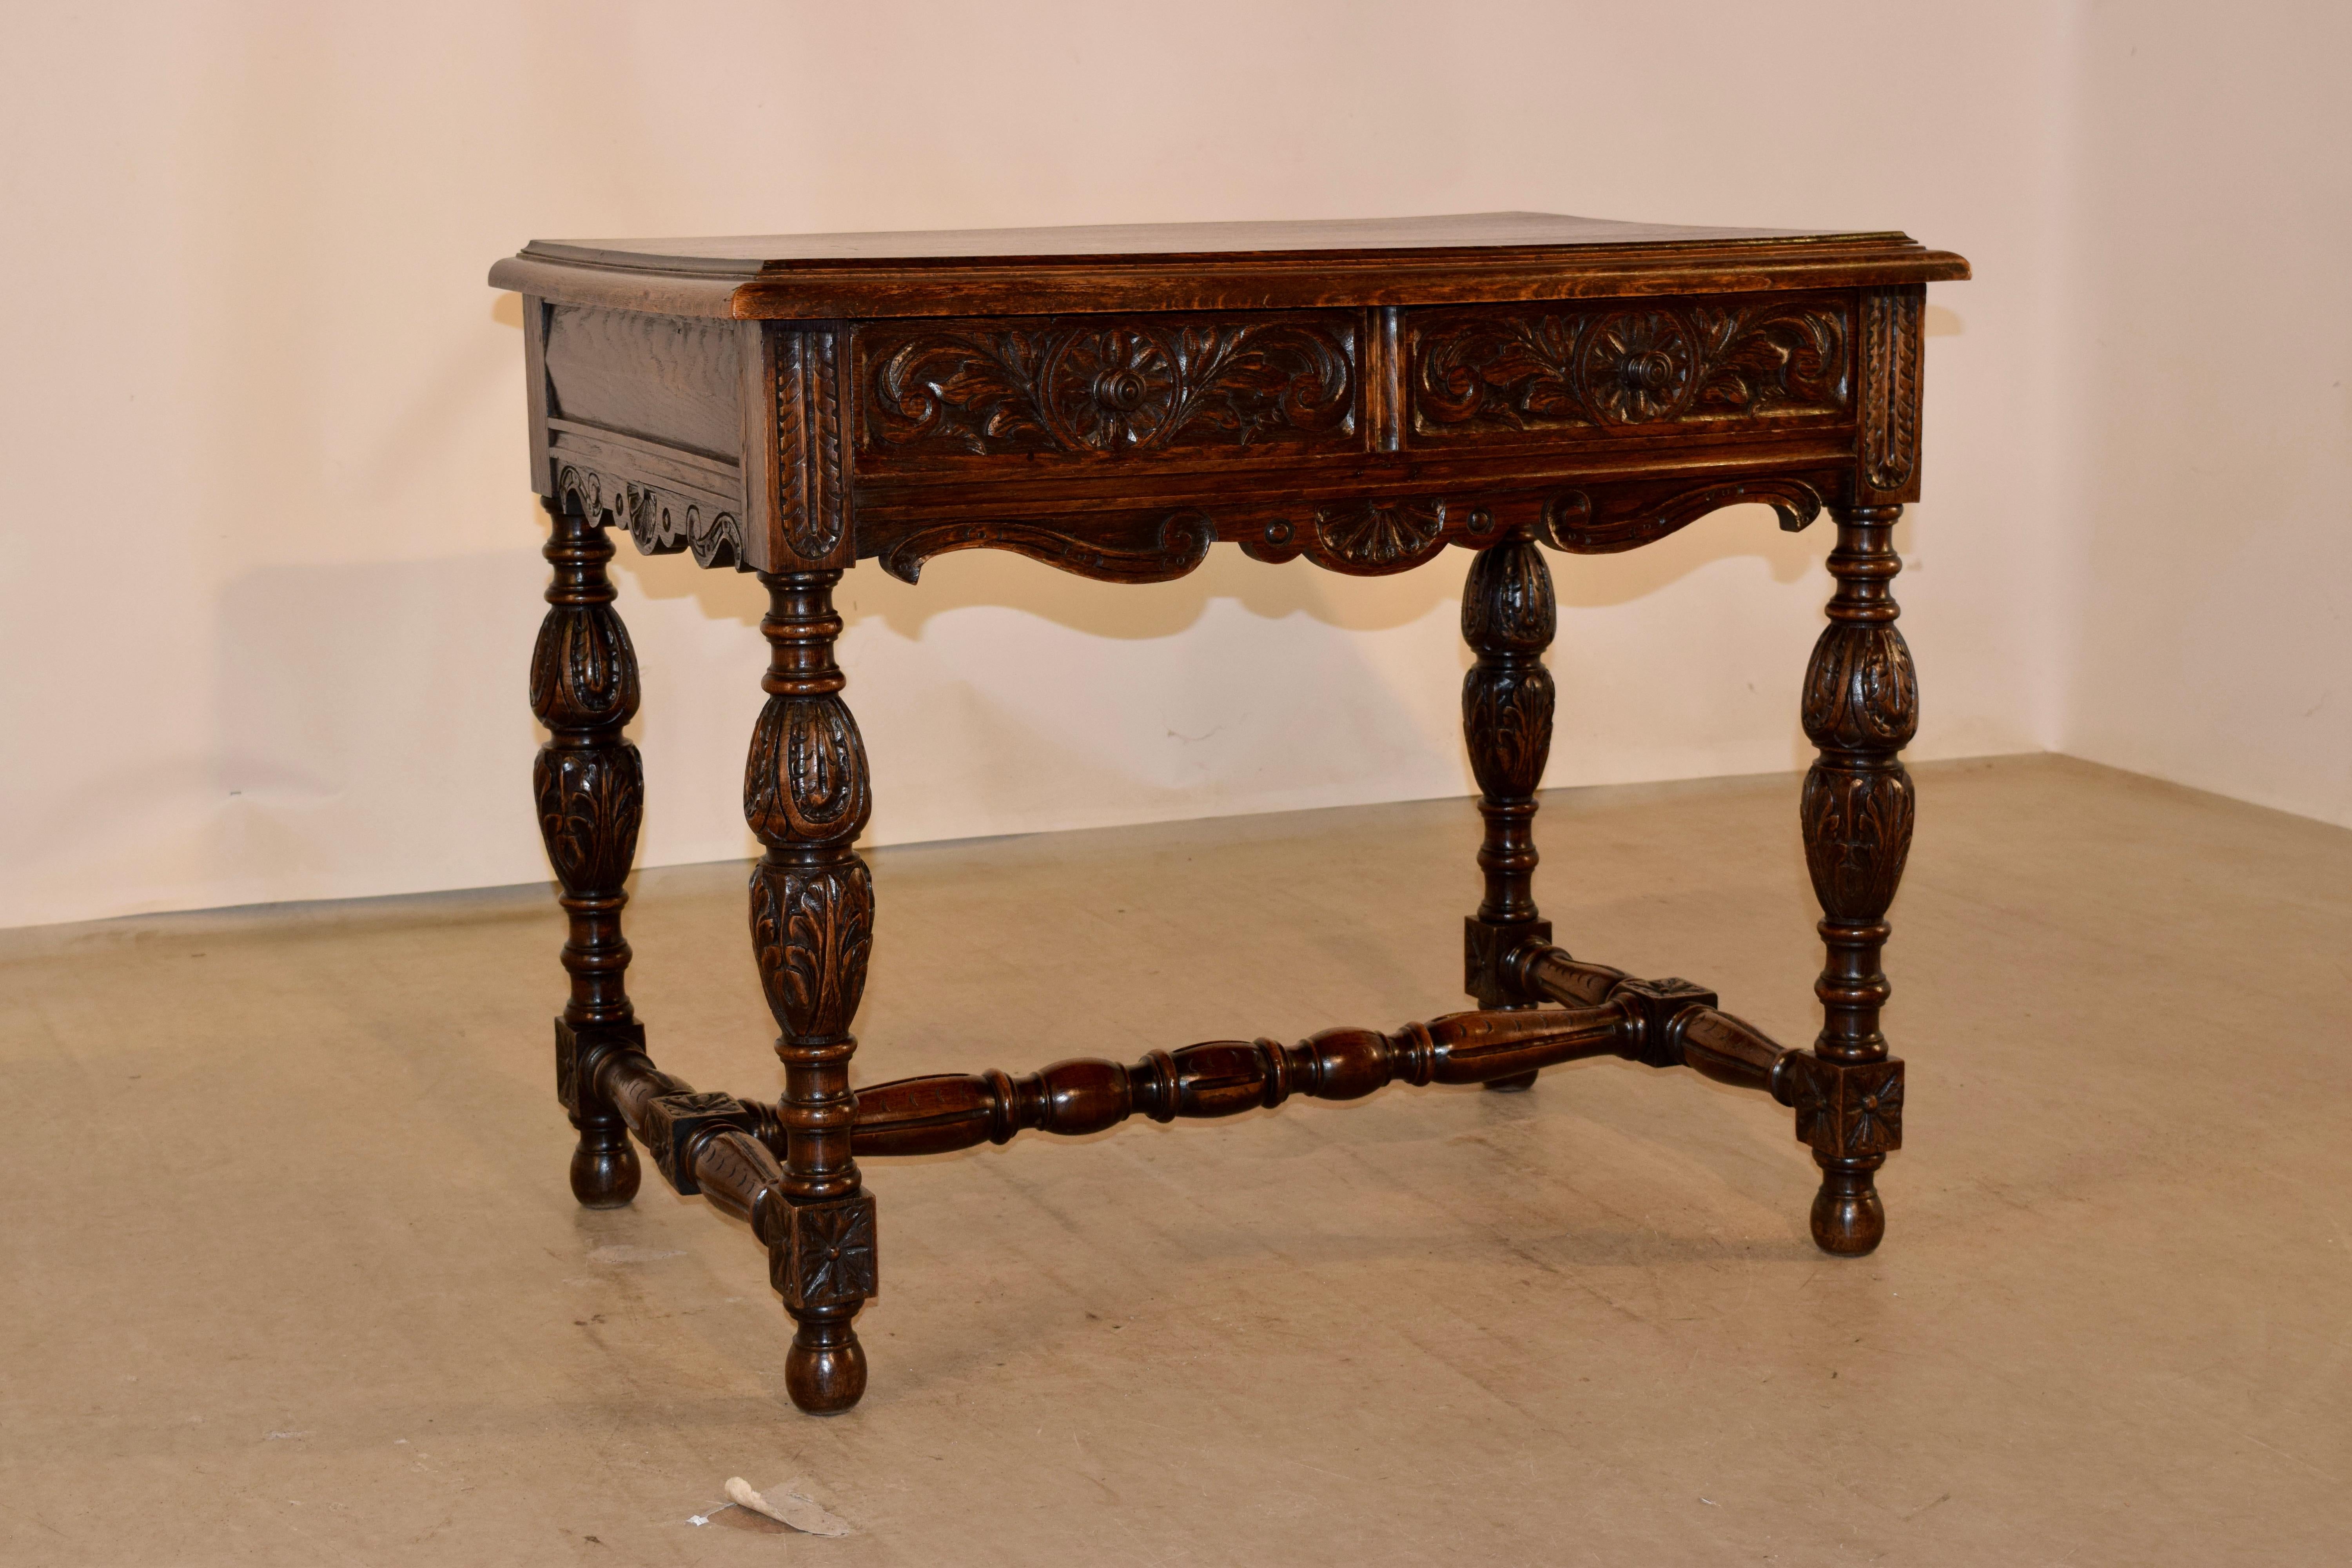 19th century oak writing table from France with a beveled edge around the top, following down to paneled sides and hand carved and scalloped aprons. The front of the table contains two drawers, both with hand carved drawer fronts over and a